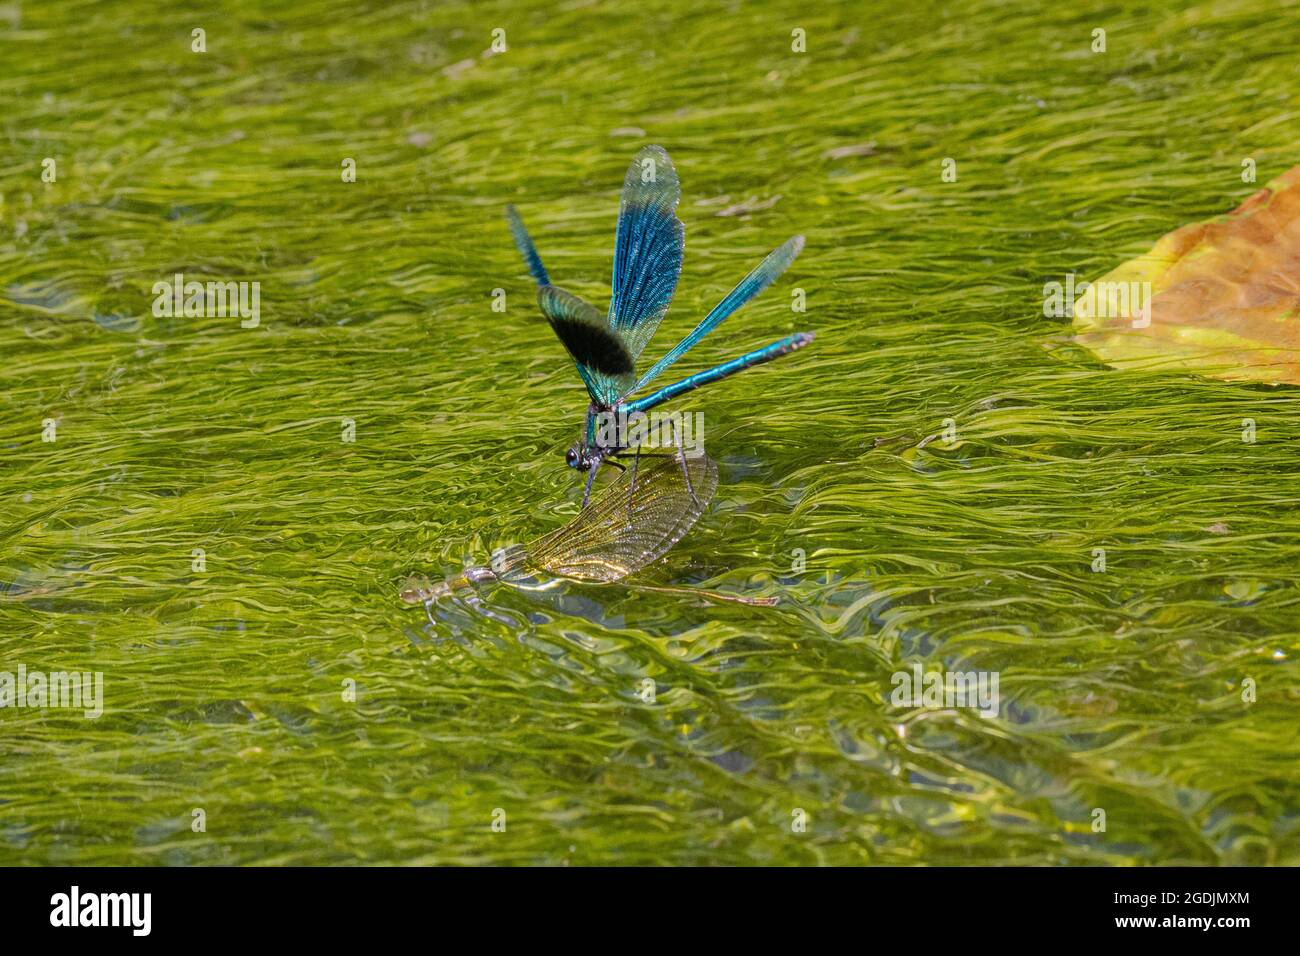 banded blackwings, banded agrion, banded demoiselle (Calopteryx splendens, Agrion splendens), male guarding submerged female laying eggs, Germany, Stock Photo